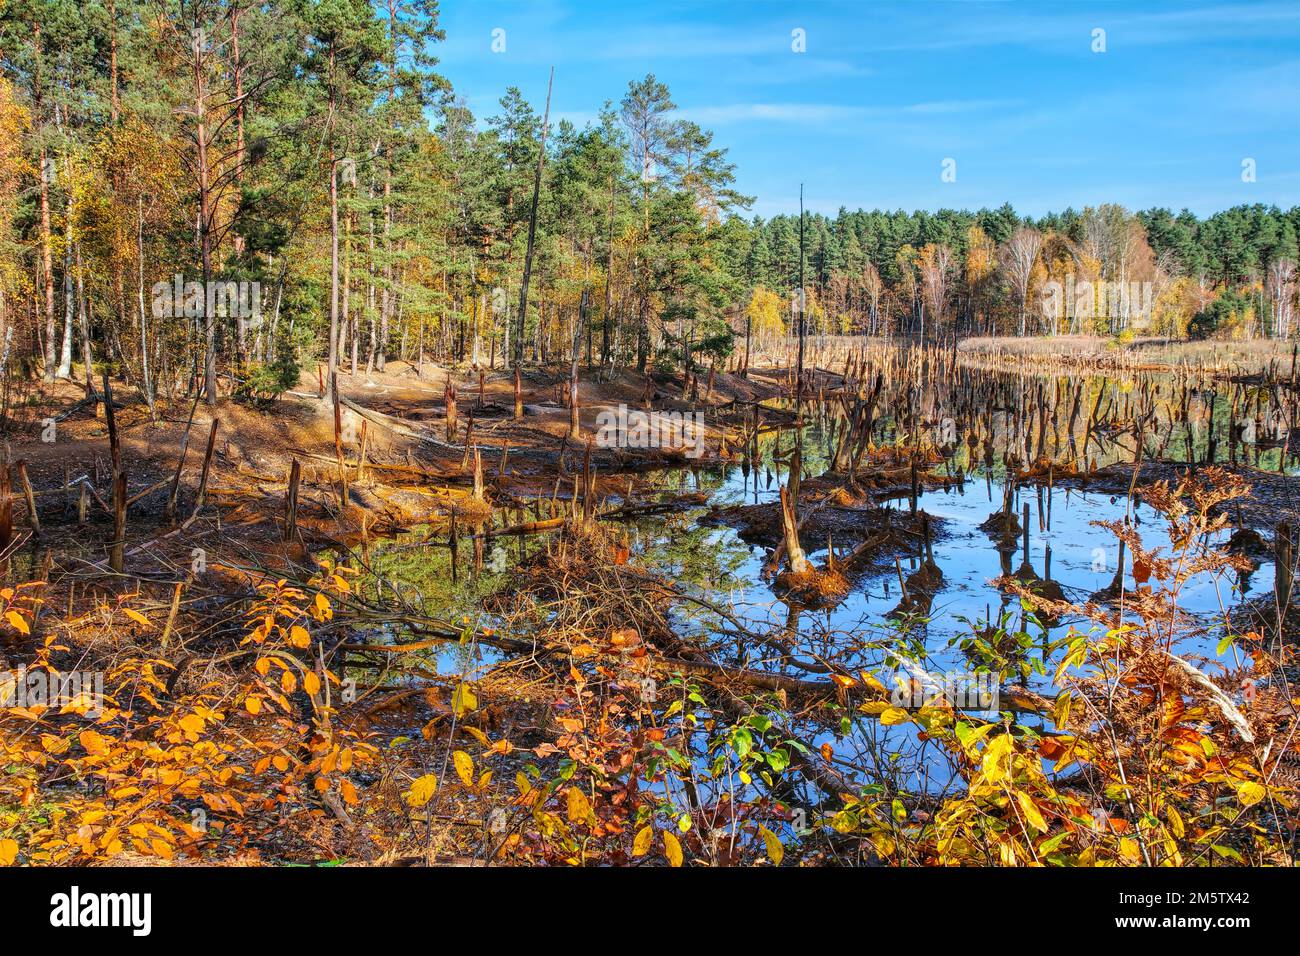 a sunken forest in the swamp, tree stumps look out of the water Stock Photo